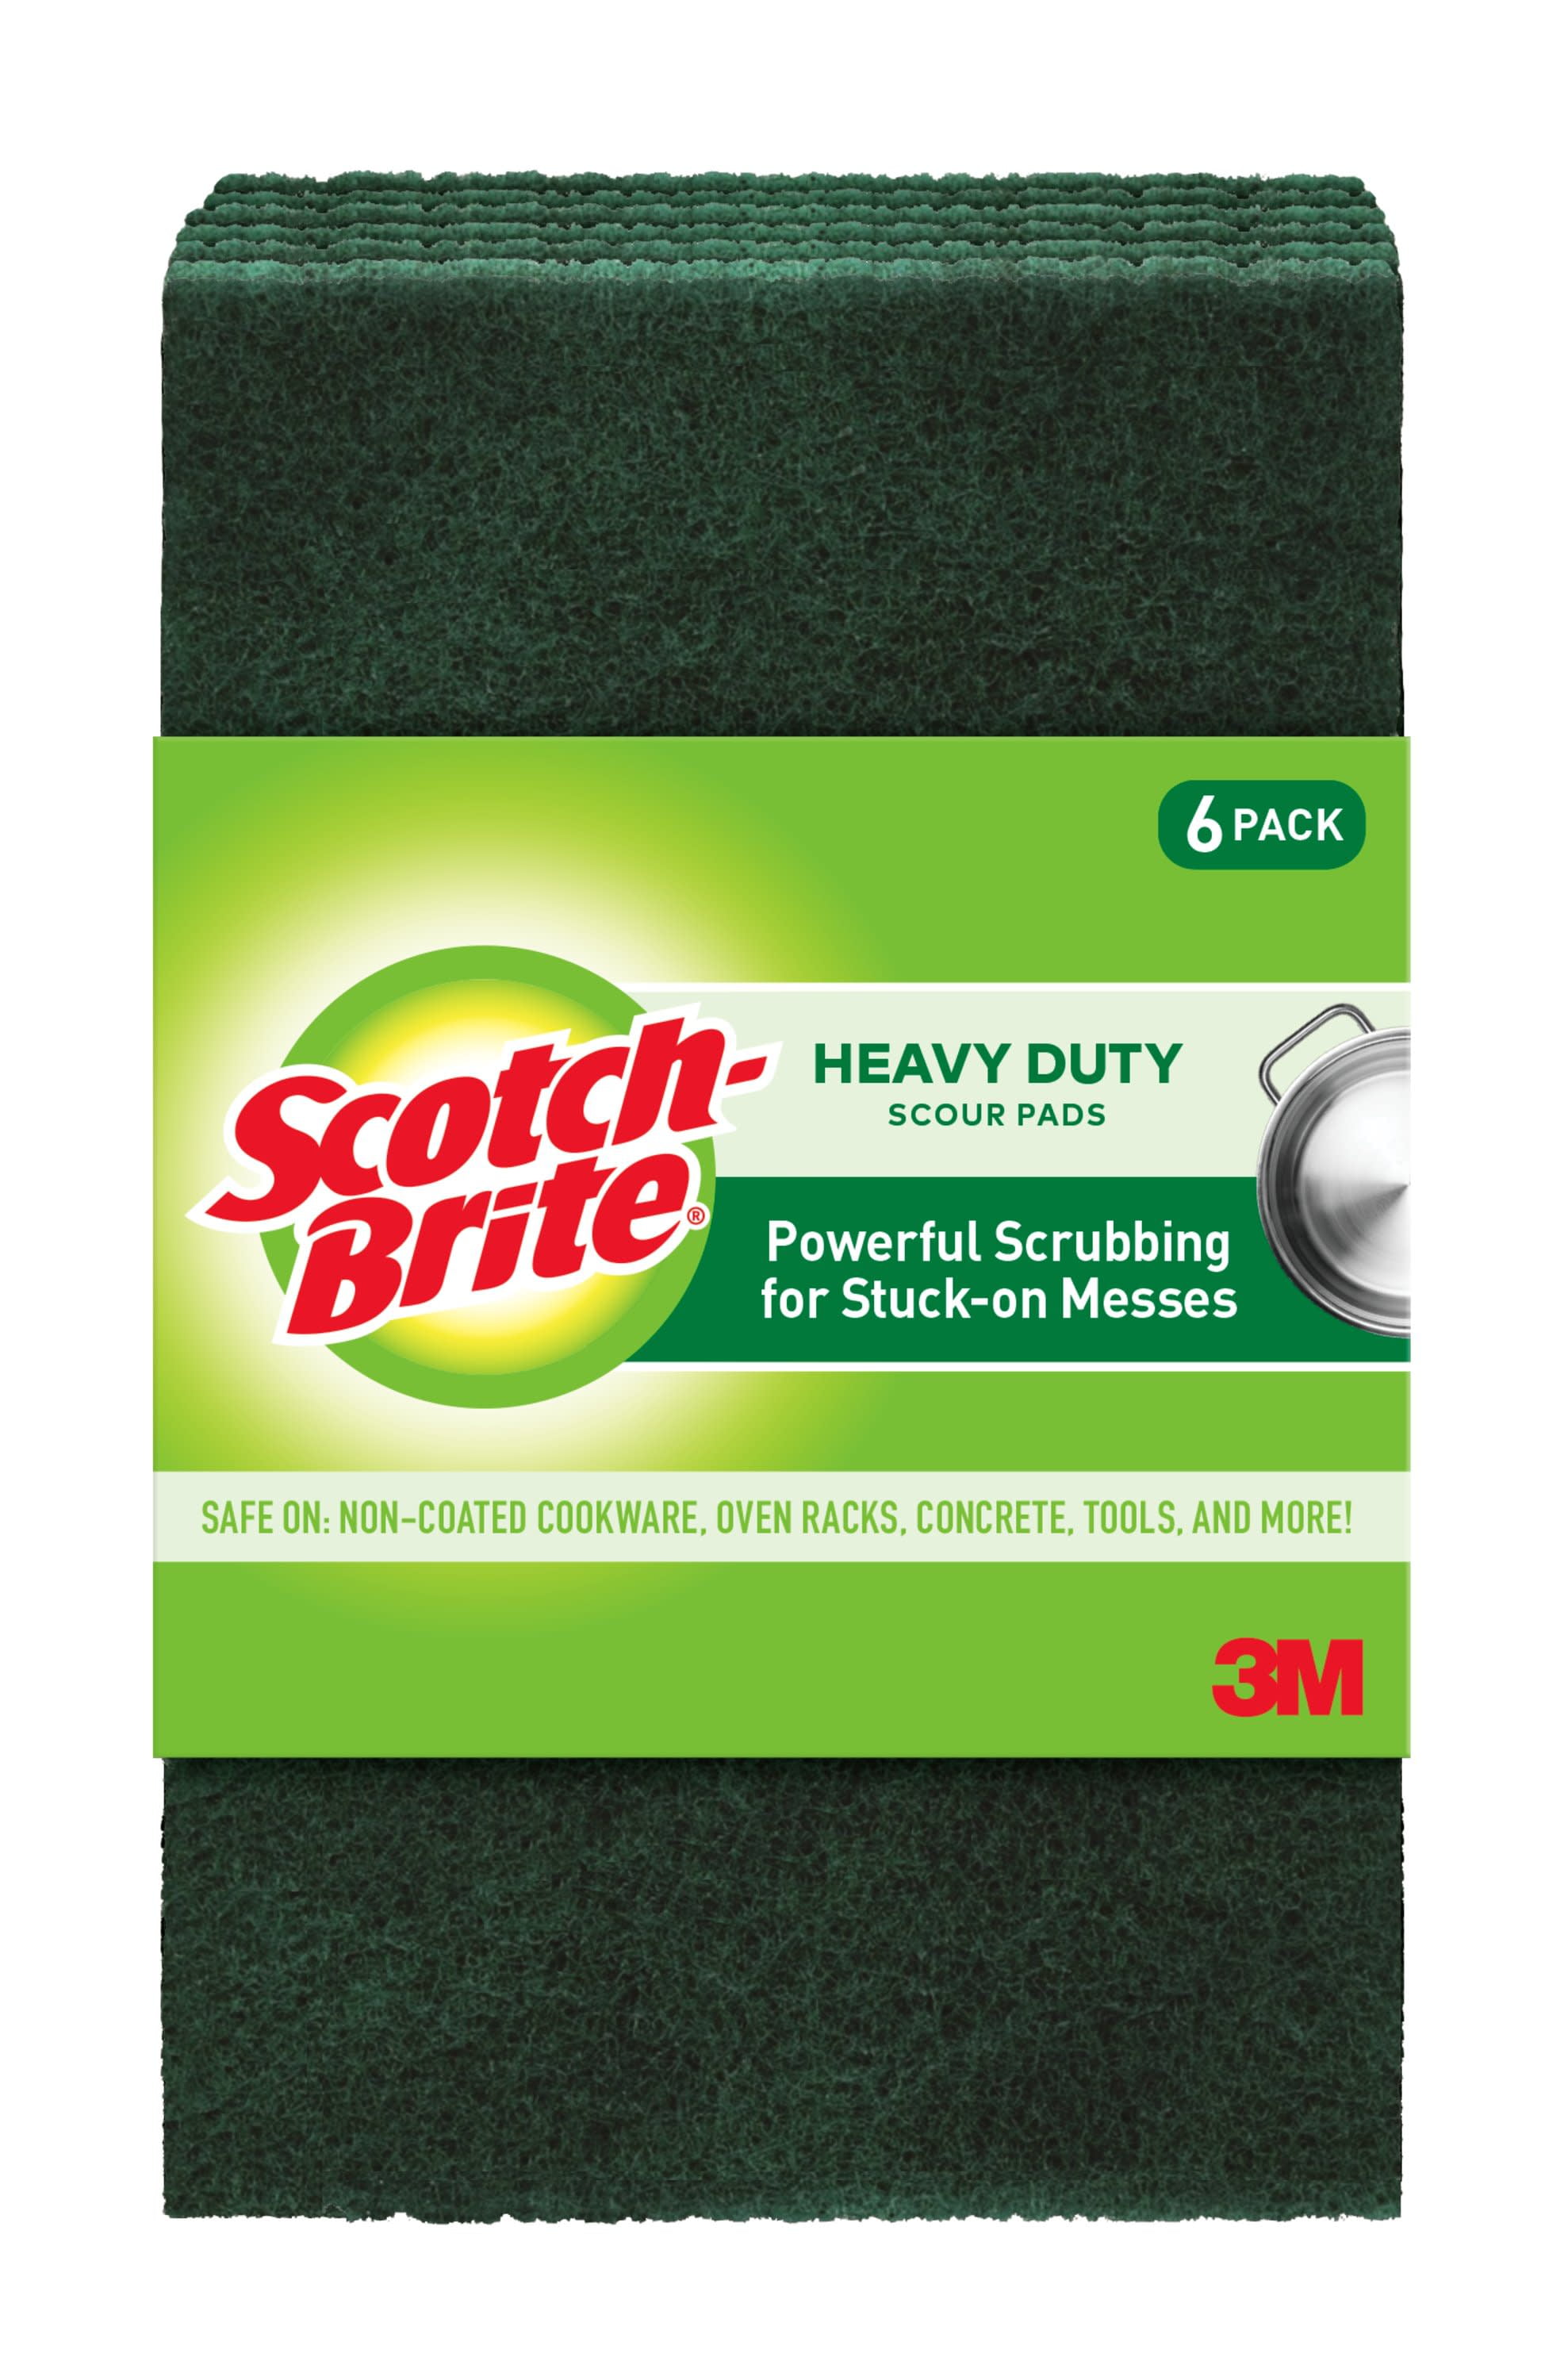 4 Pack 3M Scotch-Brite STAINLESS STEEL SCOURING PADS CLEANING SCRUBBER PADS NEW 